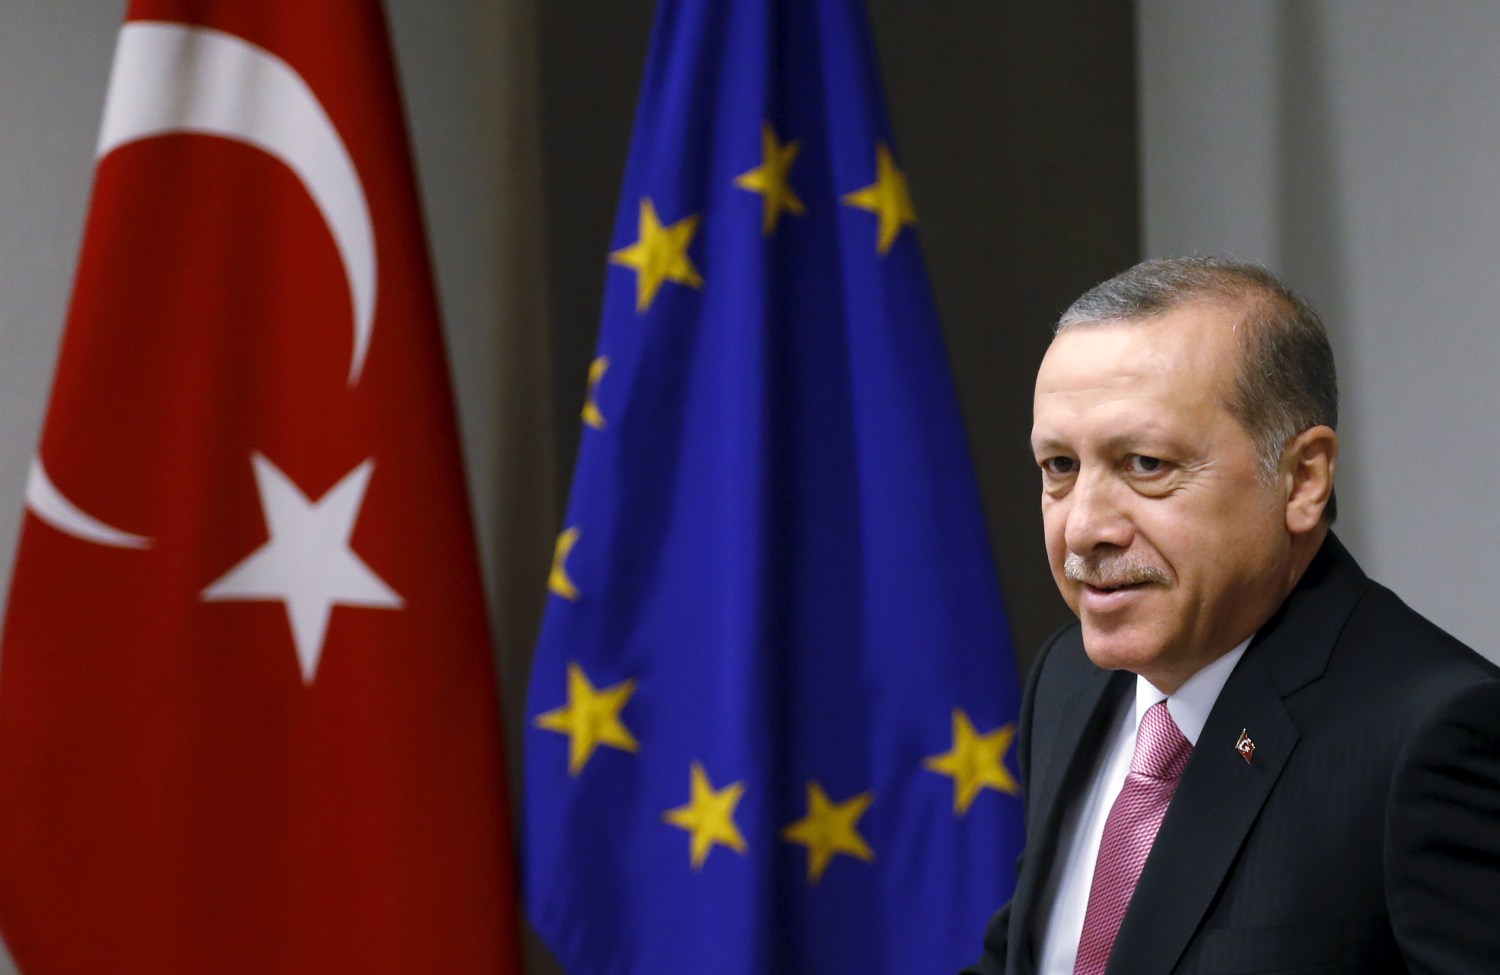 Turkey's President Tayyip Erdogan waits for the start of a meeting with European Council President Donald Tusk (unseen) at the EU Council in Brussels, Belgium October 5, 2015. Erdogan appeared to mock European Union overtures for help with its migration crisis as he arrived for a long-awaited state visit to Brussels and a string of meetings with EU leaders set to start on Monday. REUTERS/Francois Lenoir - RTS33VZ